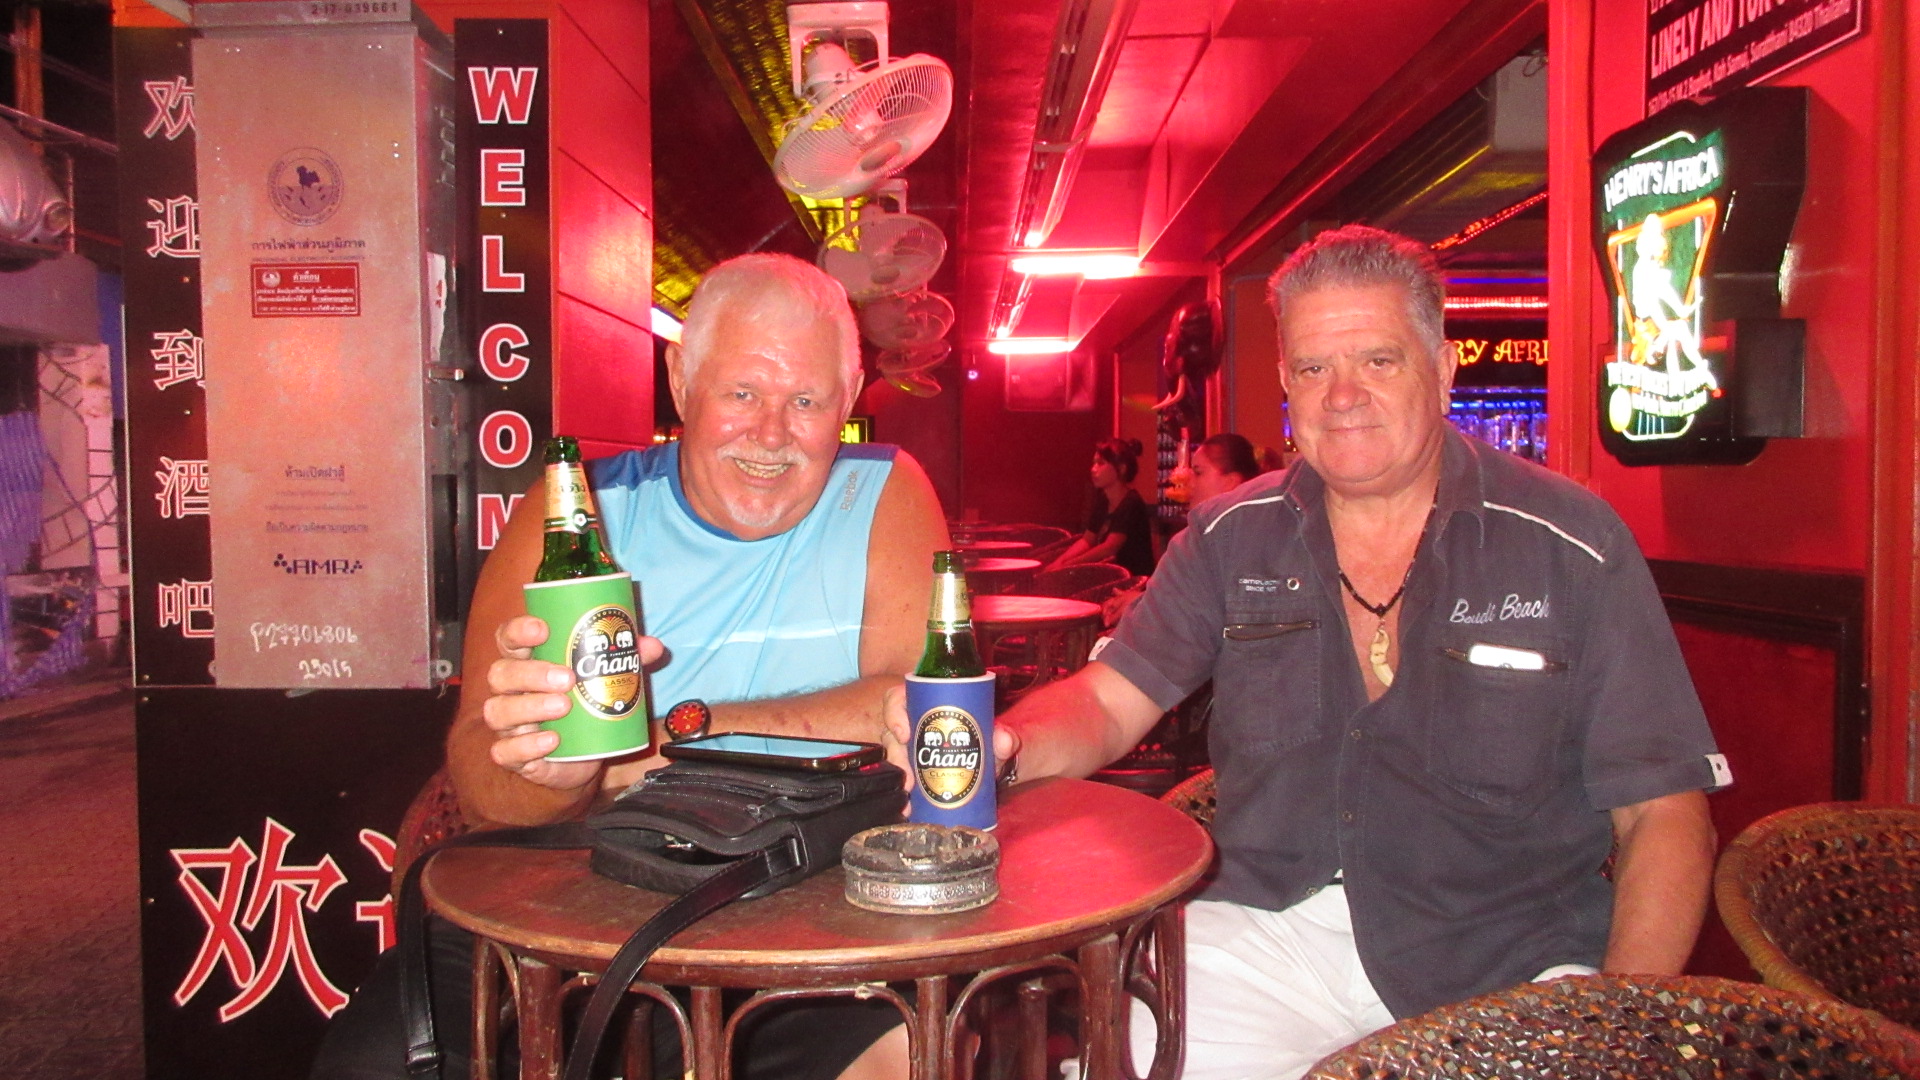 Koh Samui Excellent Sports Bars Hello From The Five Star Vagabond